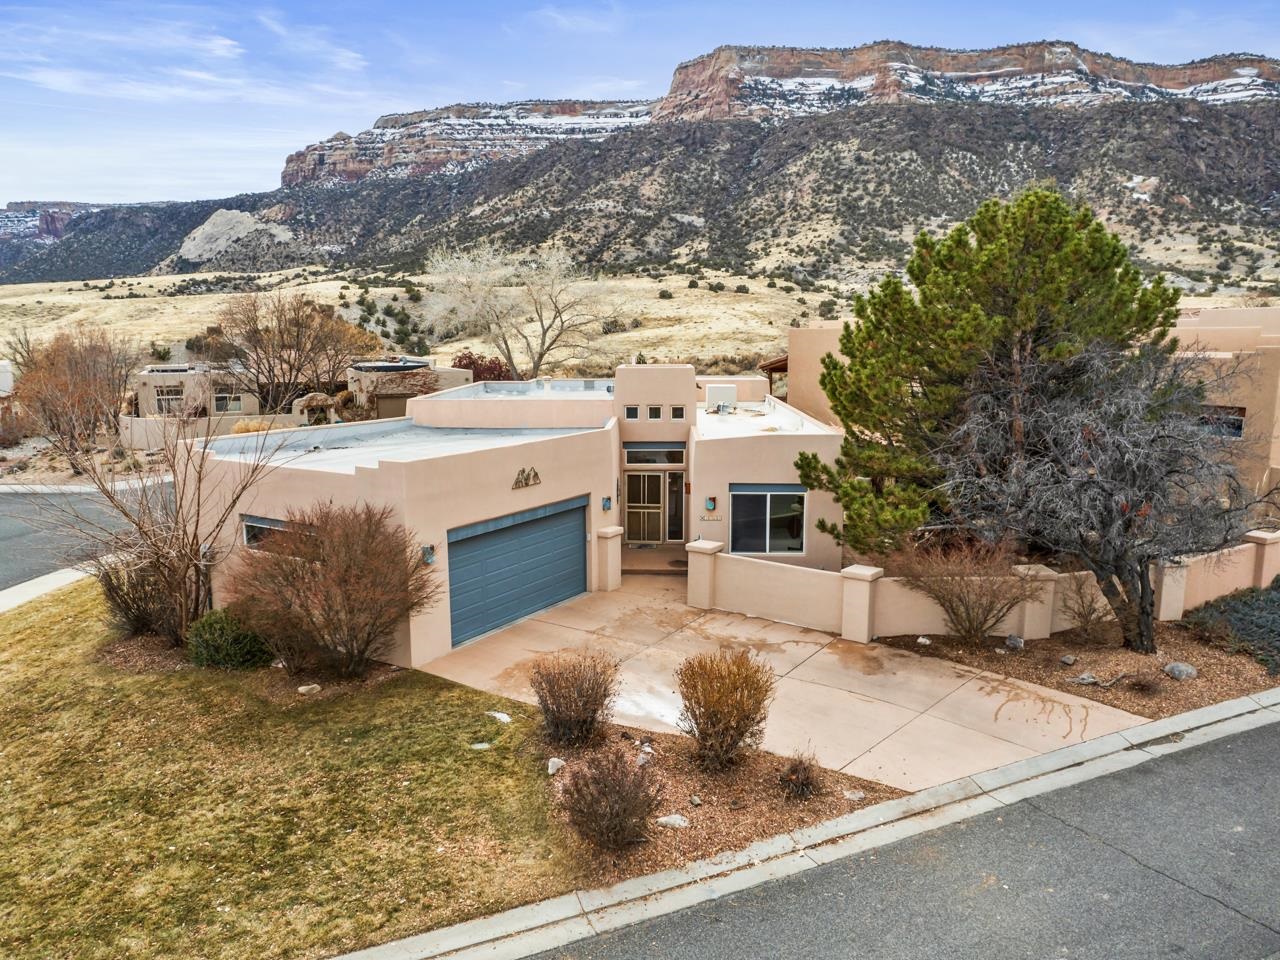 Welcome to your dream home in The Seasons neighborhood of the picturesque Redlands area in Grand Junction, CO! This beautiful 3-bed, 2-bath residence offers a perfect blend of comfort, style, and breathtaking views of the Colorado National Monument. As you step inside, you are greeted by an open living space featuring high ceilings and an abundance of natural light. The cozy gas fireplace sets the mood, creating a warm and inviting atmosphere. The dining area seamlessly connects to the rest of the living space, and a breakfast bar is an additional convenience in the beautifully updated kitchen. A flex space adds versatility to the layout, with the ability to serve as a play area, formal dining room, office space, sitting area, or any other option to meet your needs. The primary suite is a sanctuary of openness and airiness, with a large walk-in closet and a 5-piece en-suite bath. The additional two rooms are generously sized and share a full bath in the hall, with one room providing convenient access to the covered side patio. Step outside onto the open back patio, where you'll find ample space for entertaining, grilling, and soaking in the panoramic views under the red cliffs of the Monument. The surroundings offer a wealth of outdoor activities, including hiking, biking, and climbing. Golf enthusiasts will appreciate the proximity to the Tiara Rado Golf Course just up the road. Convenience is key, with schools, parks, shopping, and the charming Two Rivers Winery nearby. Plus, it's just a short drive to Grand Junction or Fruita for a variety of entertainment options. Whether you seek adventure in the great outdoors or prefer a relaxing evening at home, this property caters to all your lifestyle needs. Don't miss the opportunity to make this incredible home your own and experience the best of Western Colorado living!